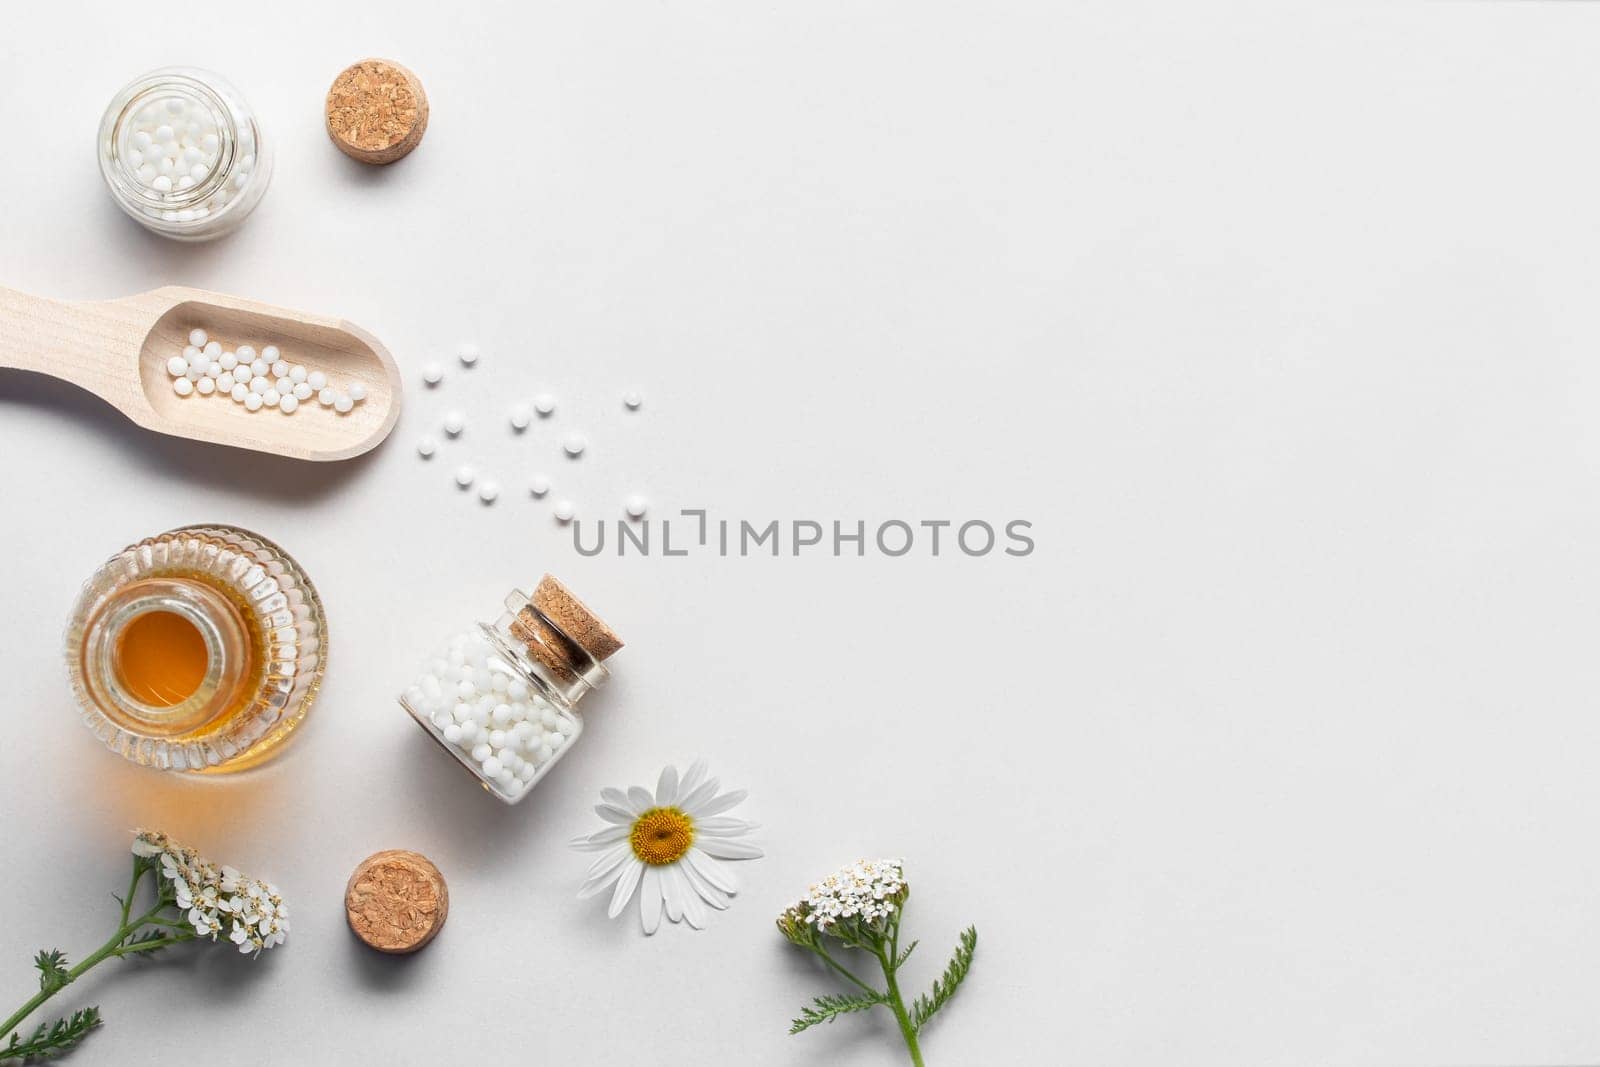 Homeopathic medicines and medicinal plants on a light background, copy space, flatlay.